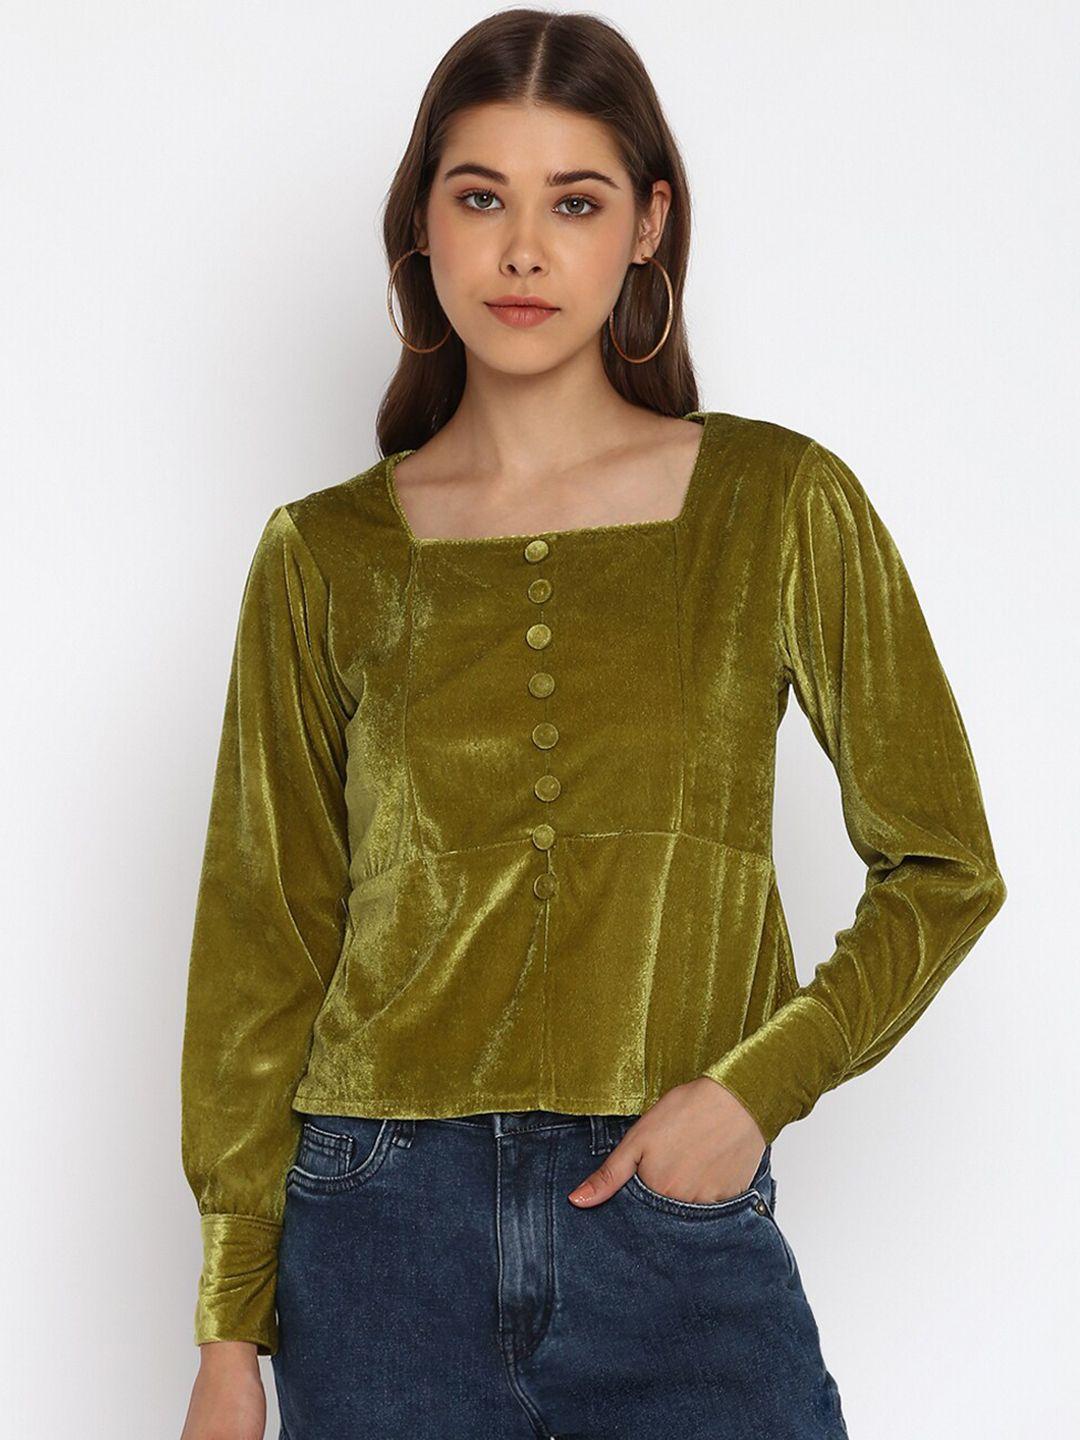 mayra square neck cuffed sleeves velvet top